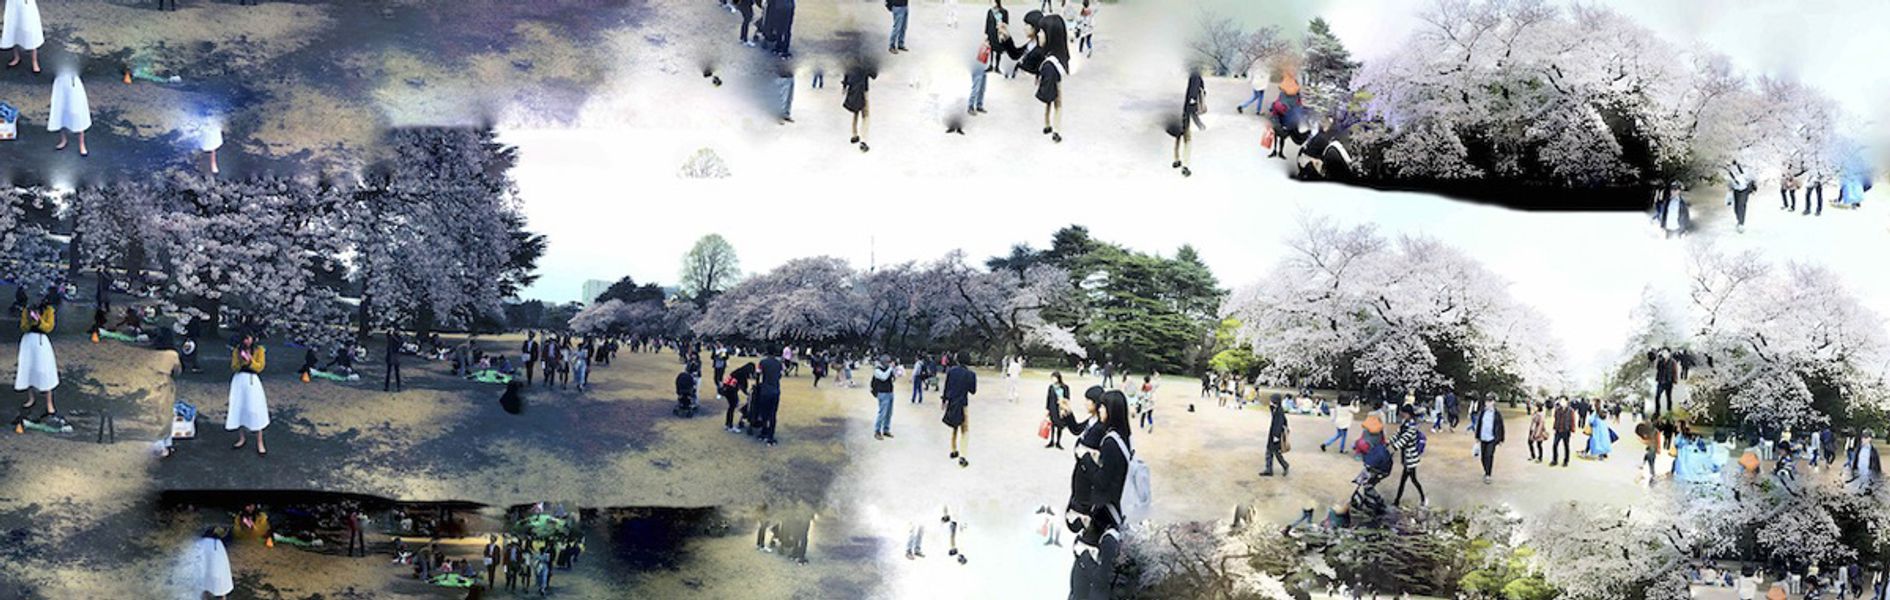 Delia Dickman abstract photography panorama park in Japan with people and cherry blossom trees overlays